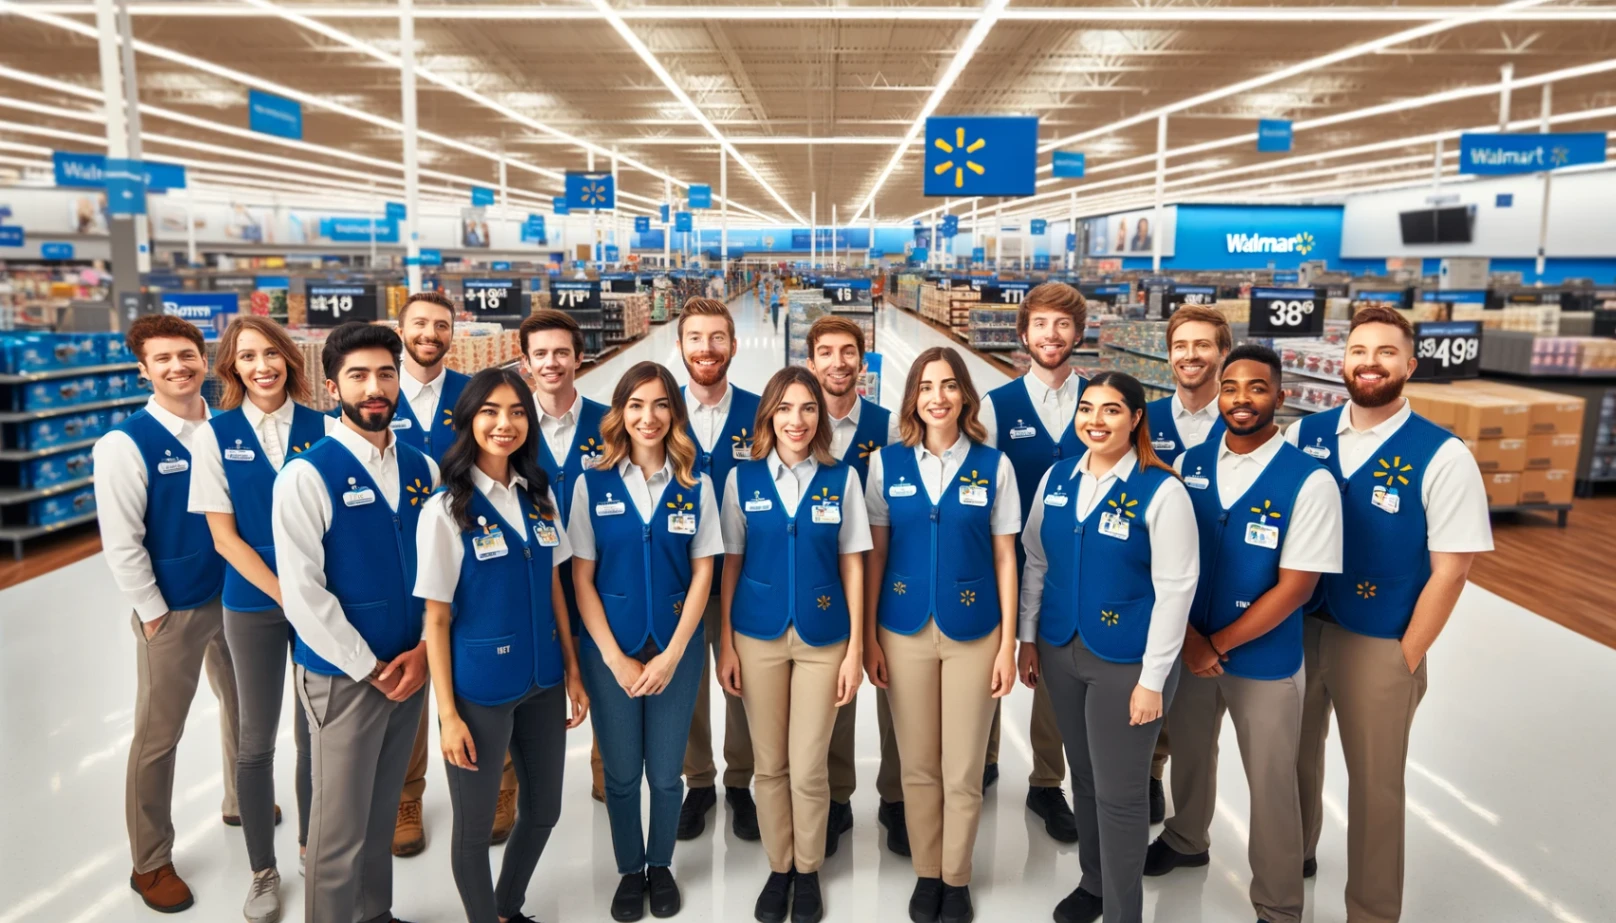 Learn How to Apply for a Position at Walmart